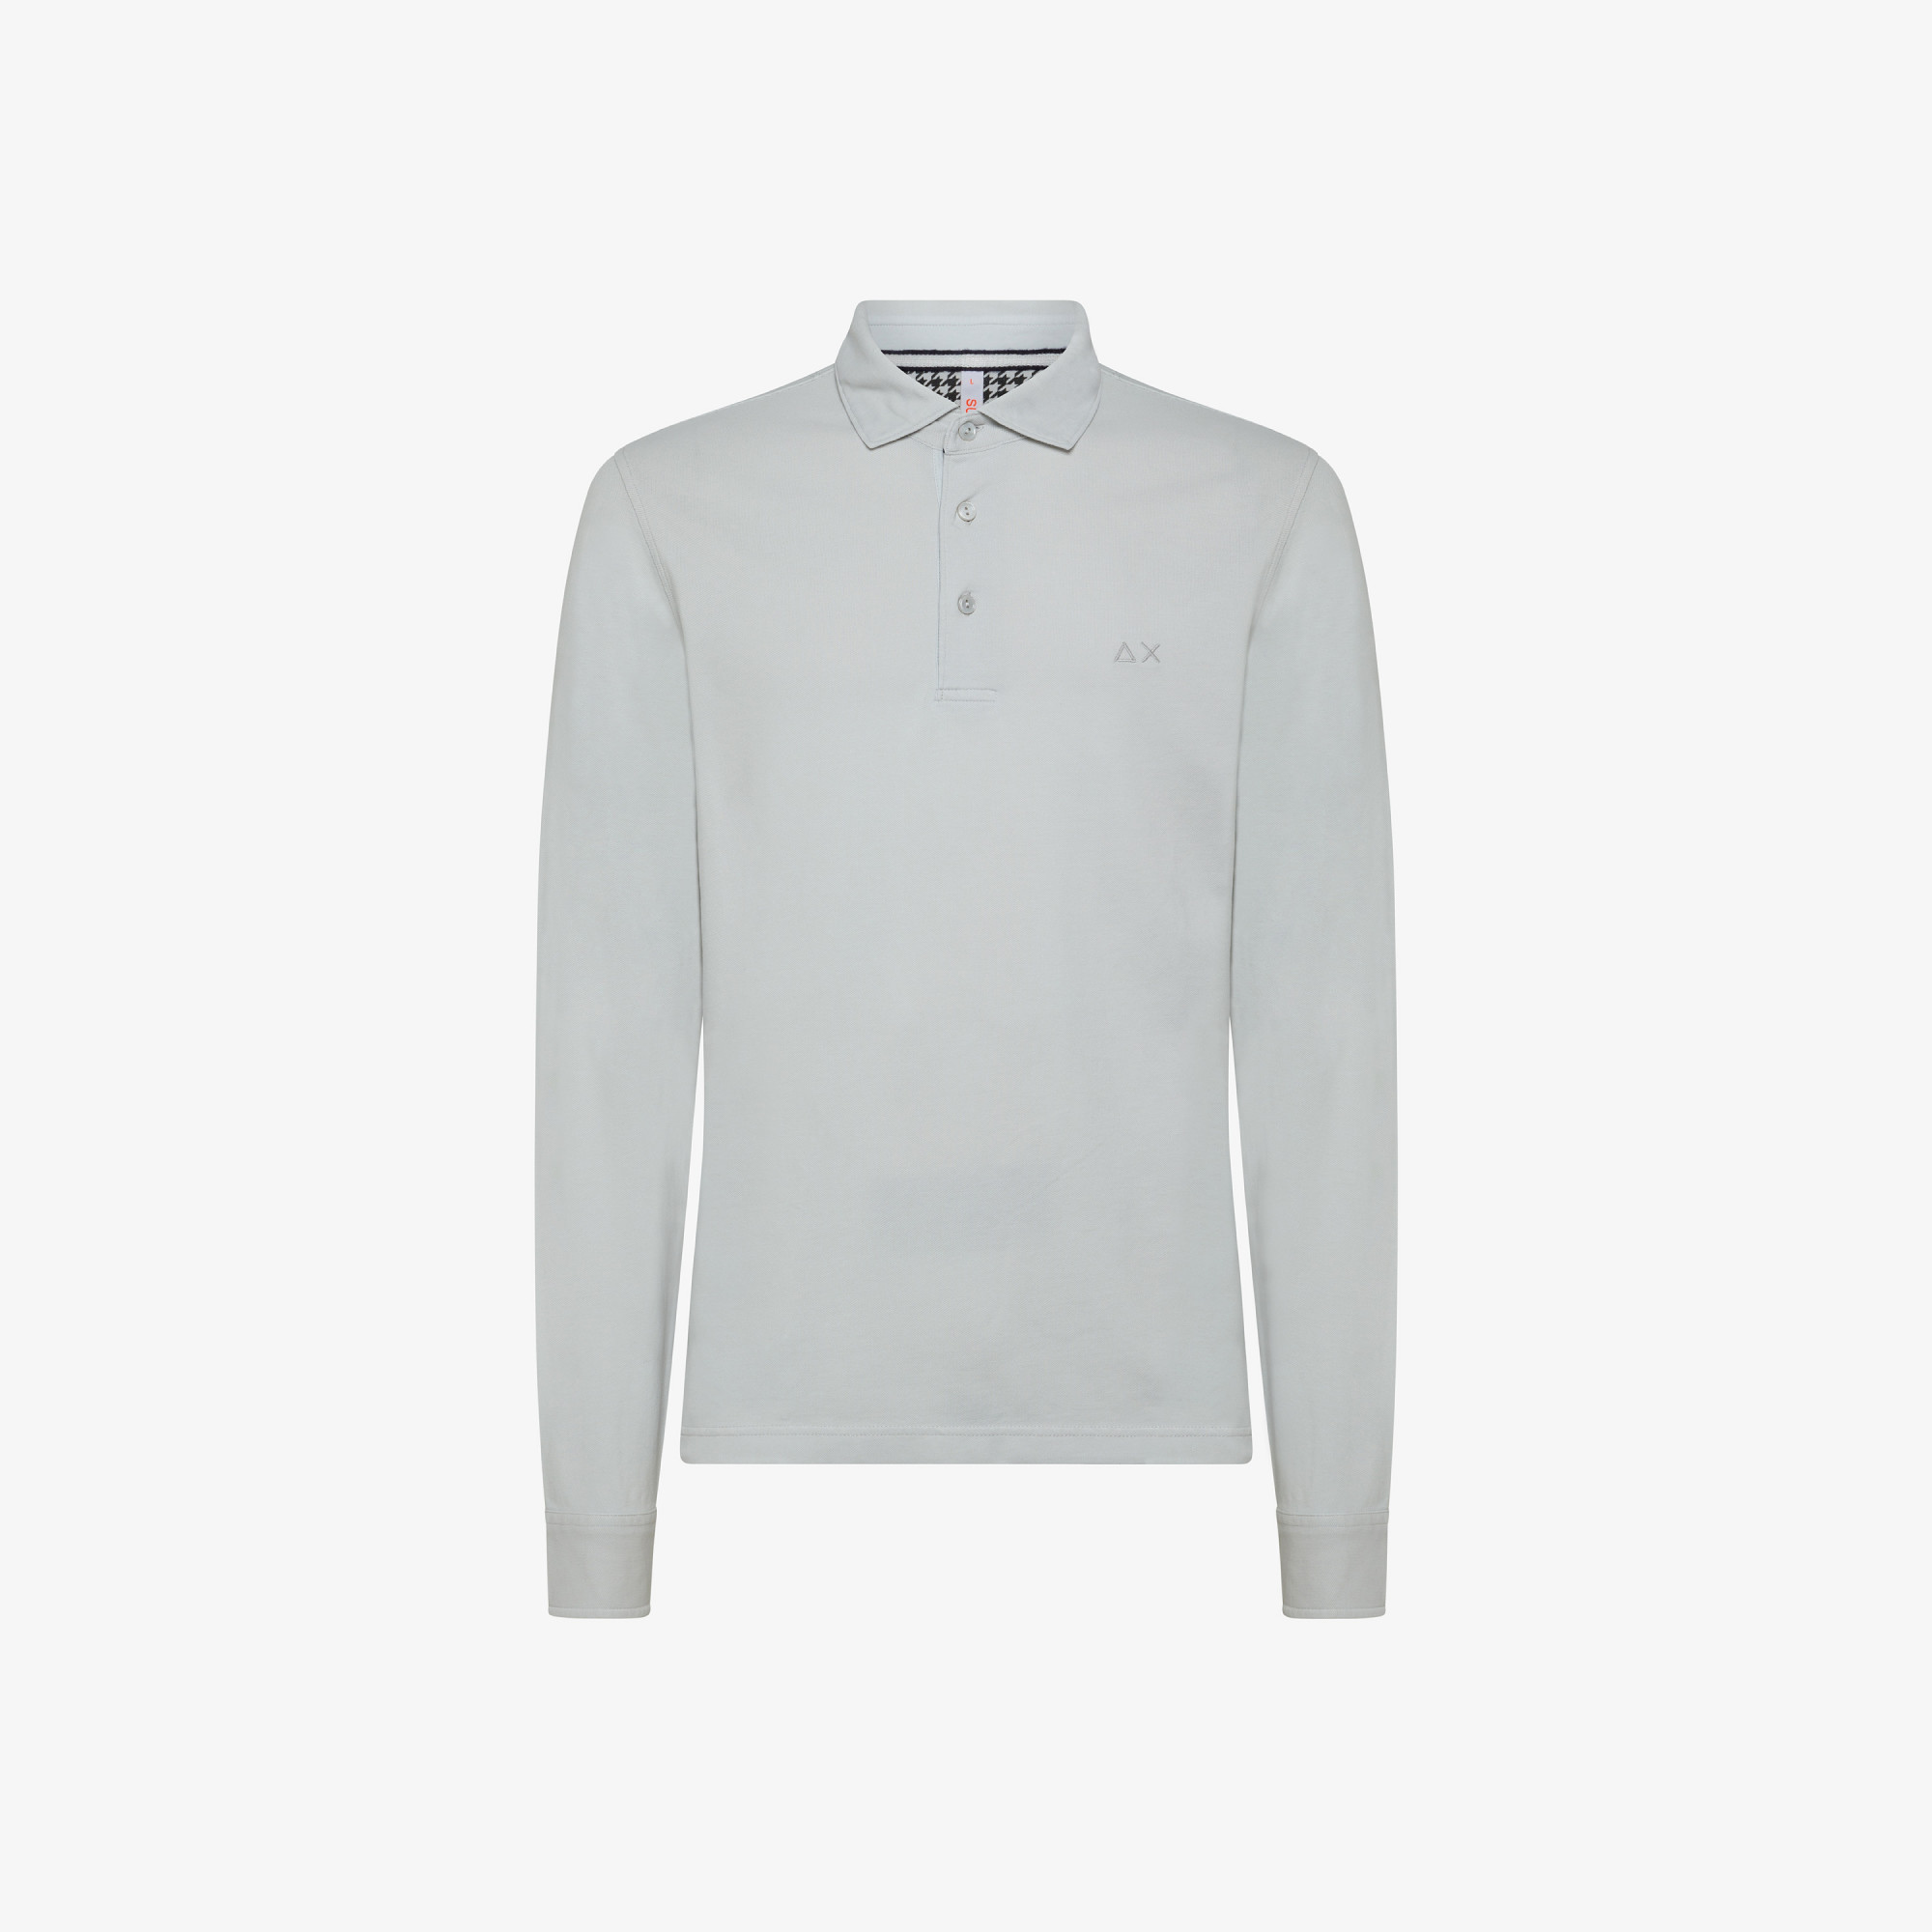 POLO EL. SHIRT COLLAR COLD DYE L/S OYSTER